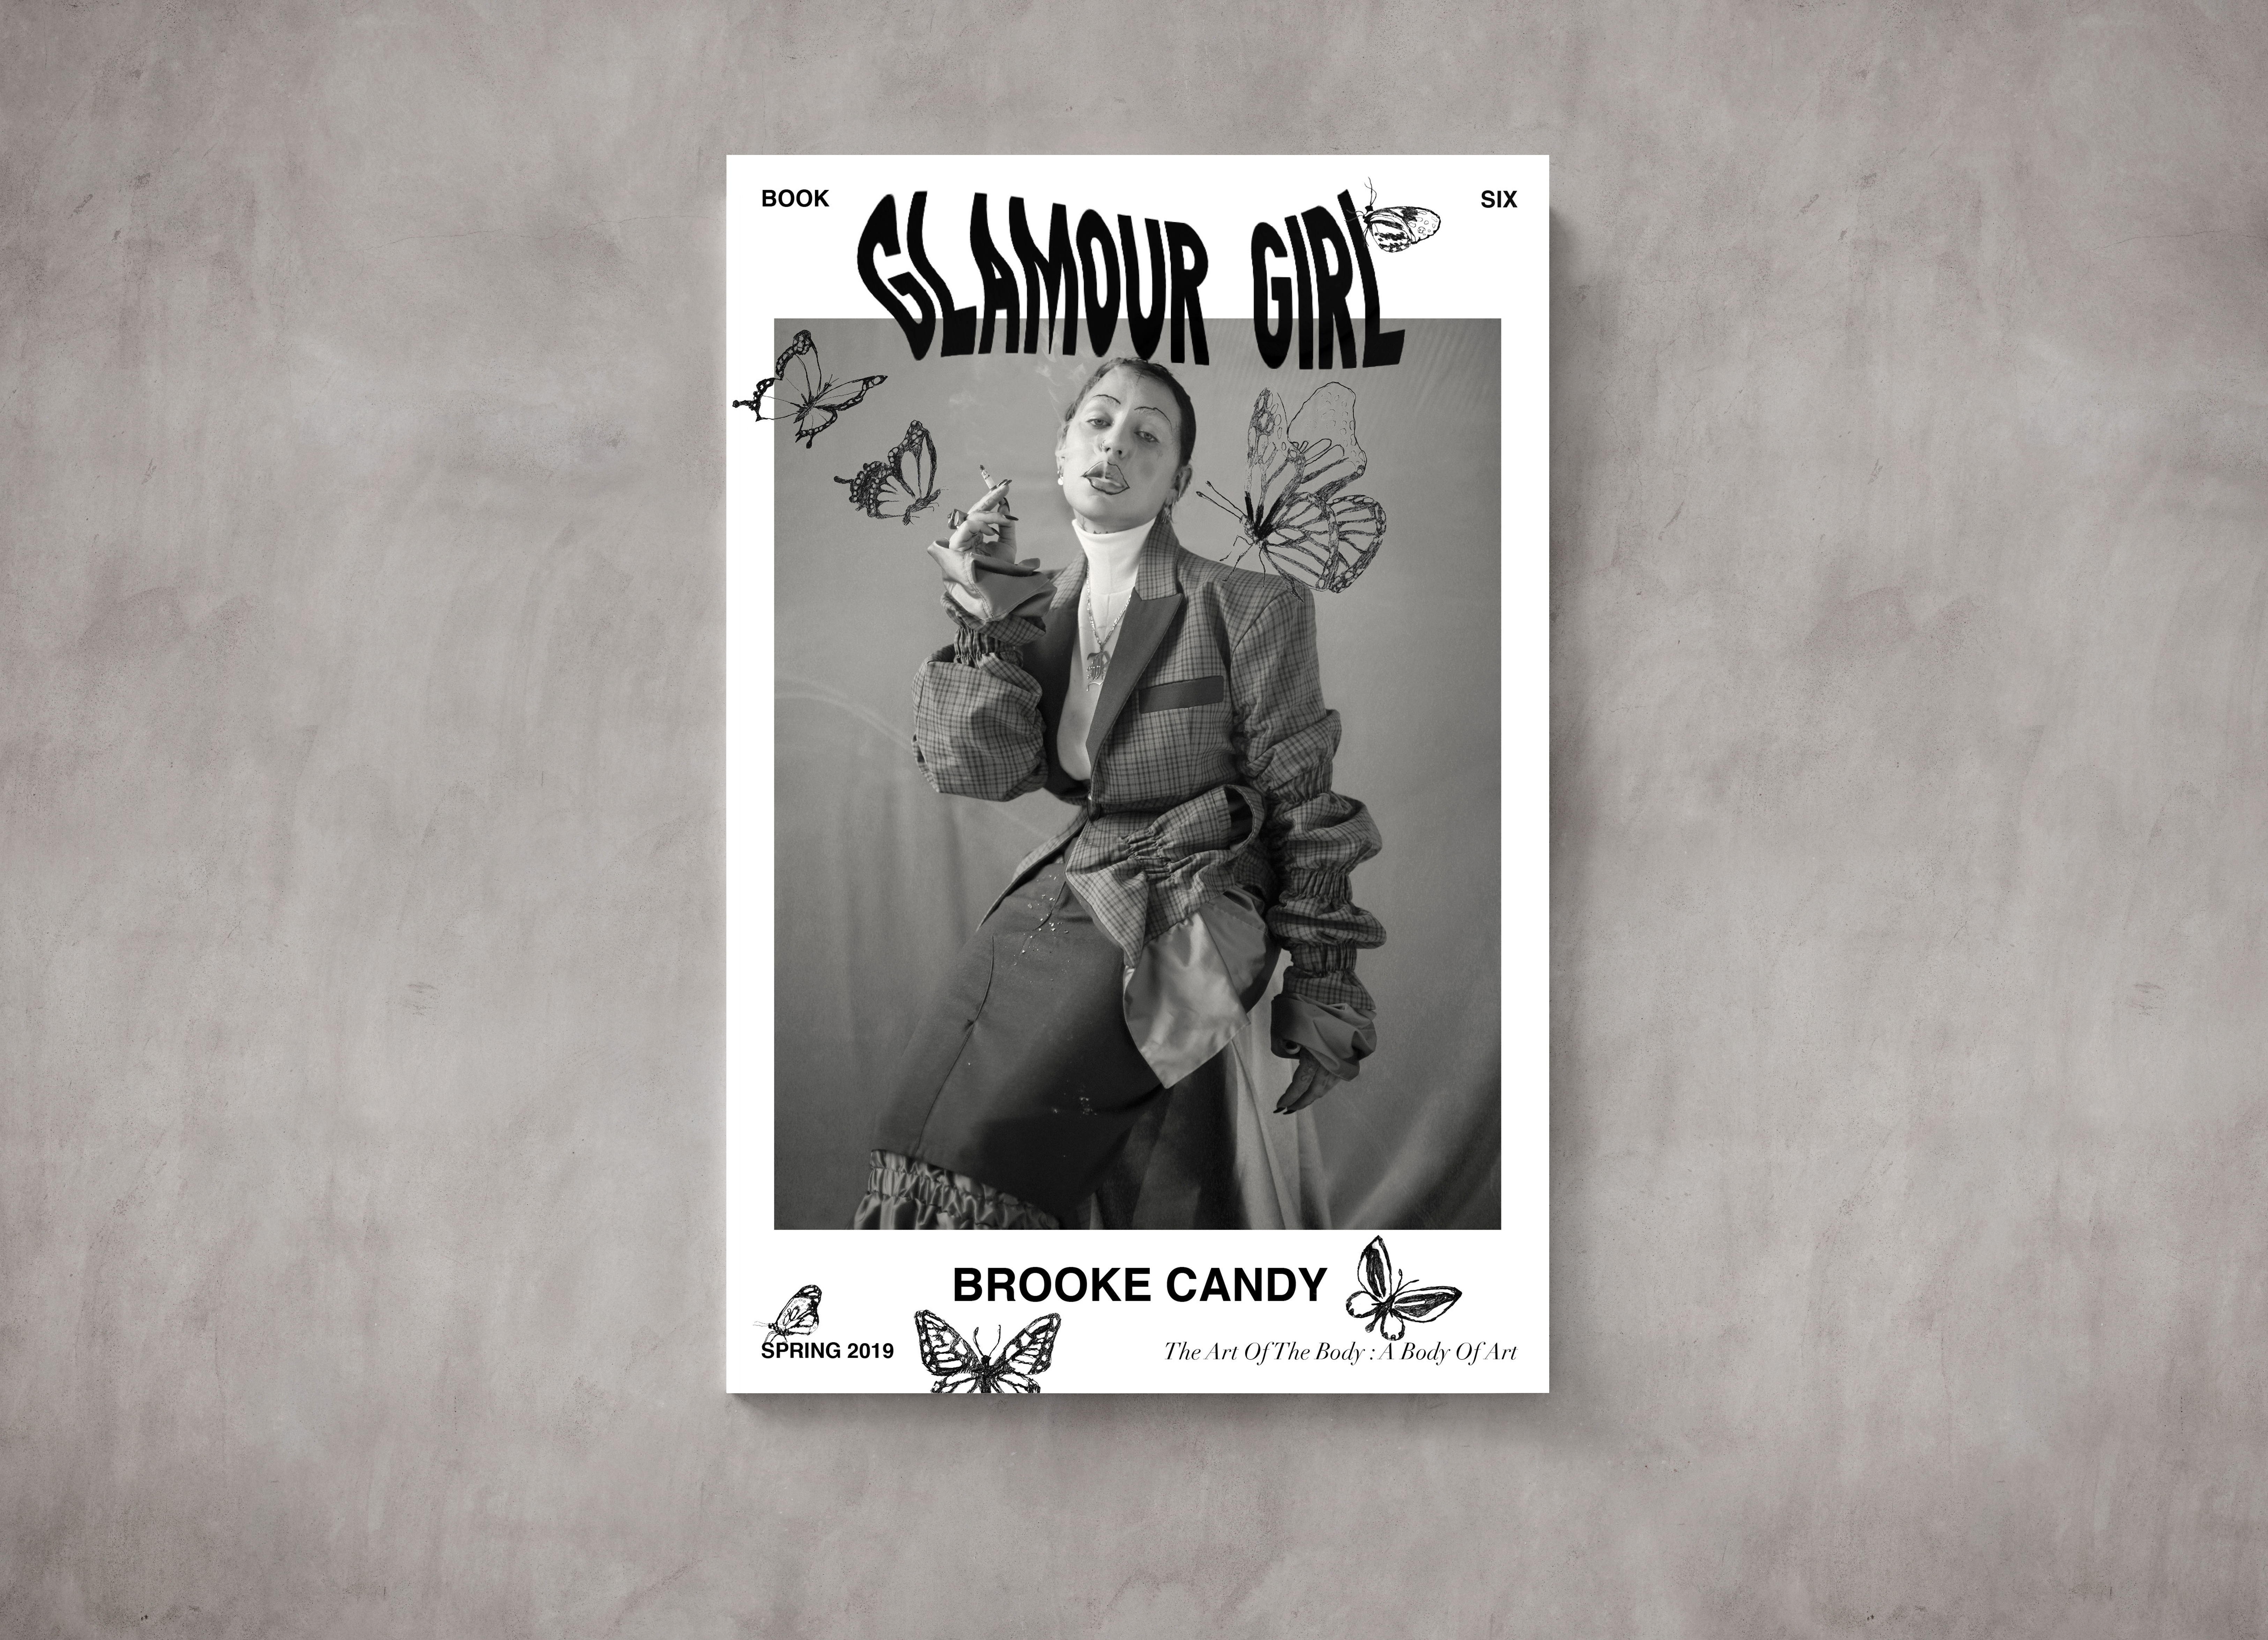 The sixth edition of Glamour Girl magazine features cover girl Brooke Candy